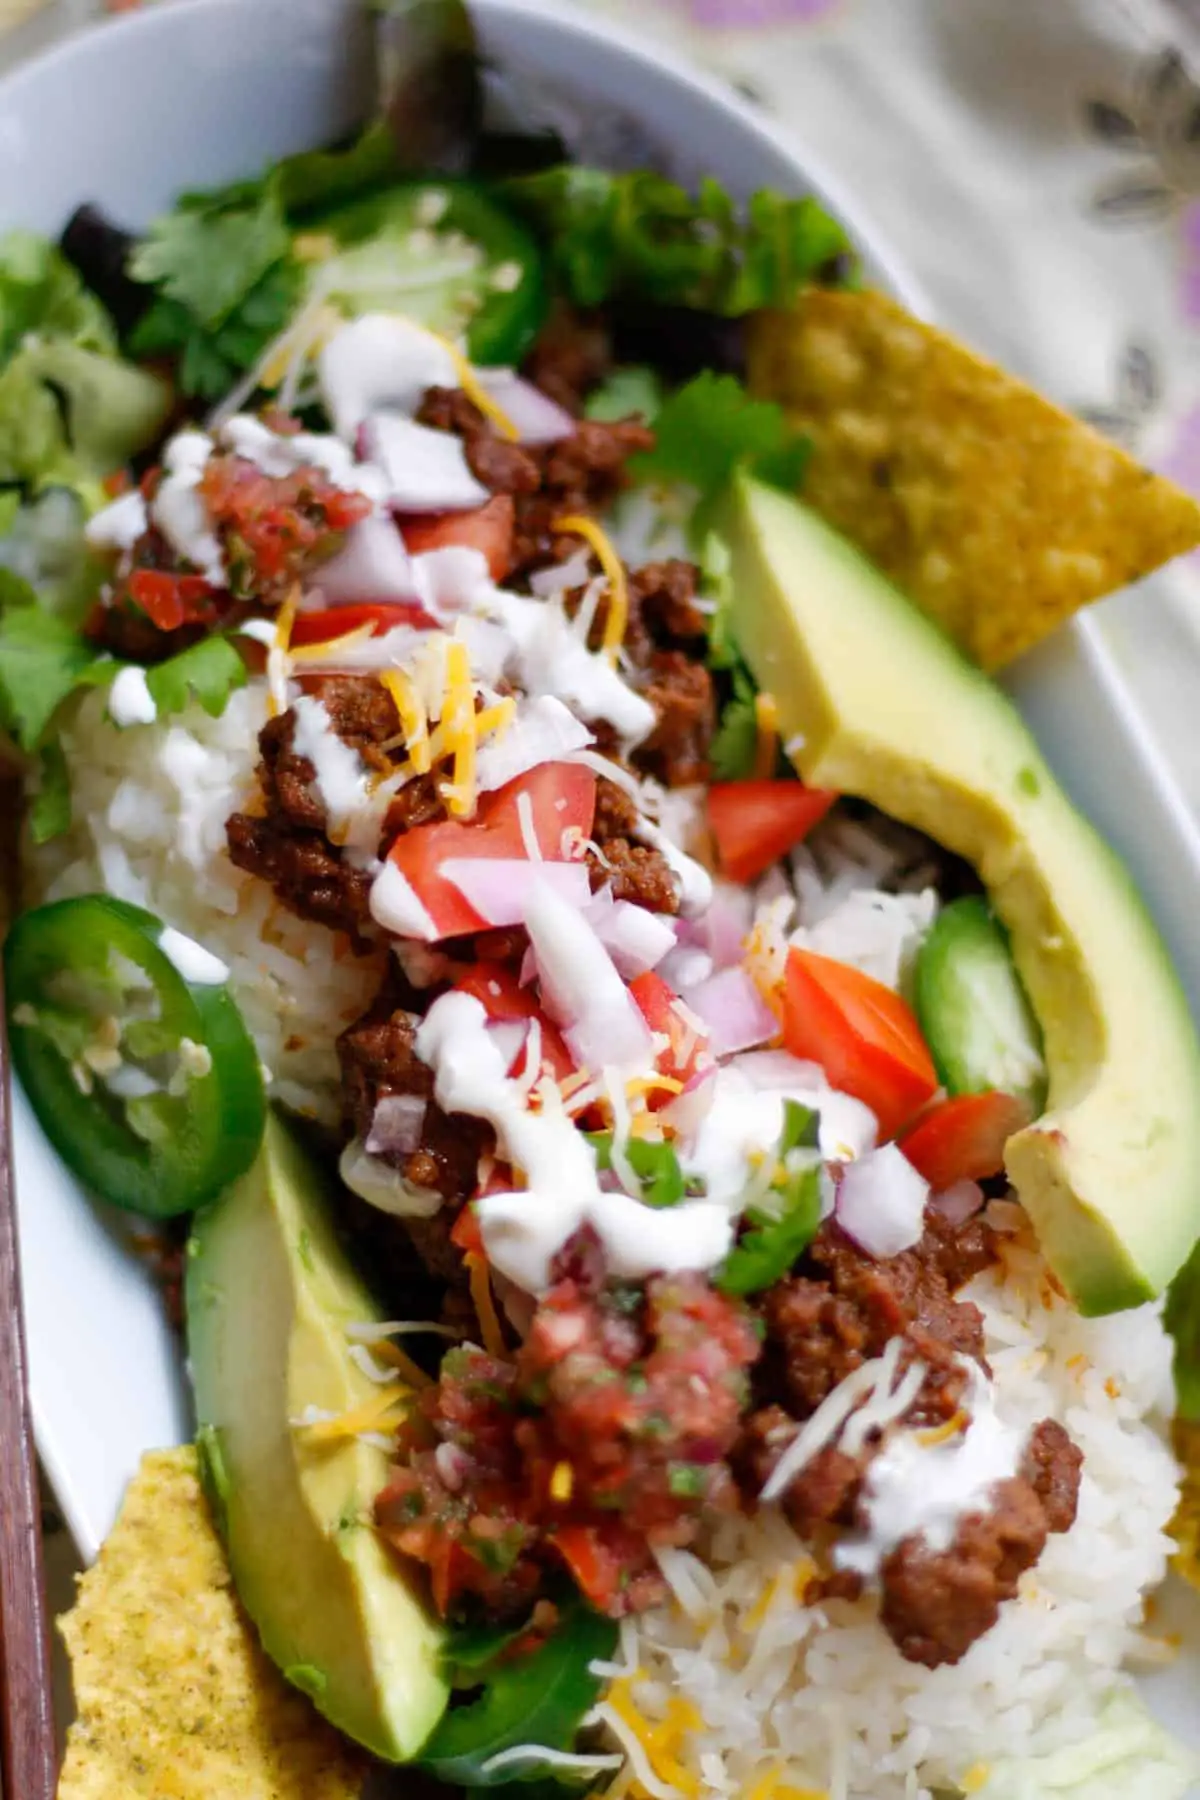 Japanese Taco rice which is rice topped with taco seasoned ground beef garnished with avocado, tortilla chips, diced tomato and onion, sliced jalapenos, shredded lettuce and cheese, sour cream and salsa in a white dish.